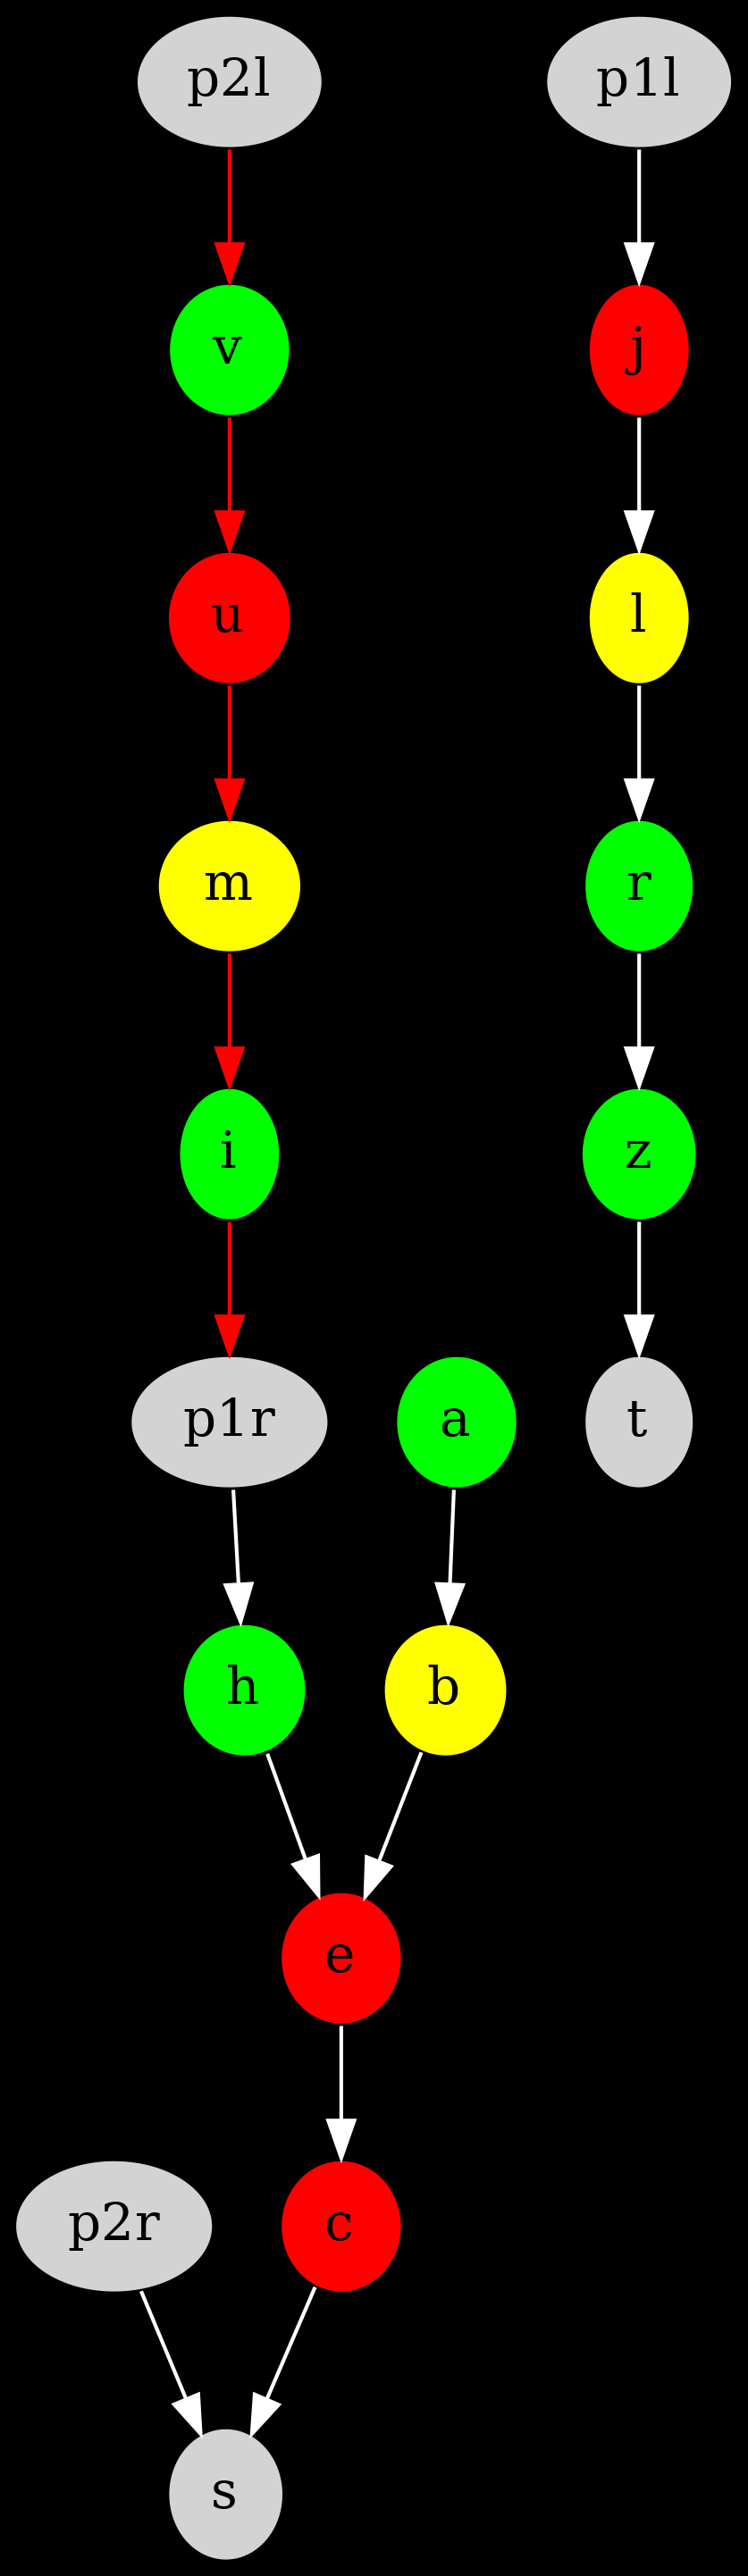 expanded graph for configuration 111